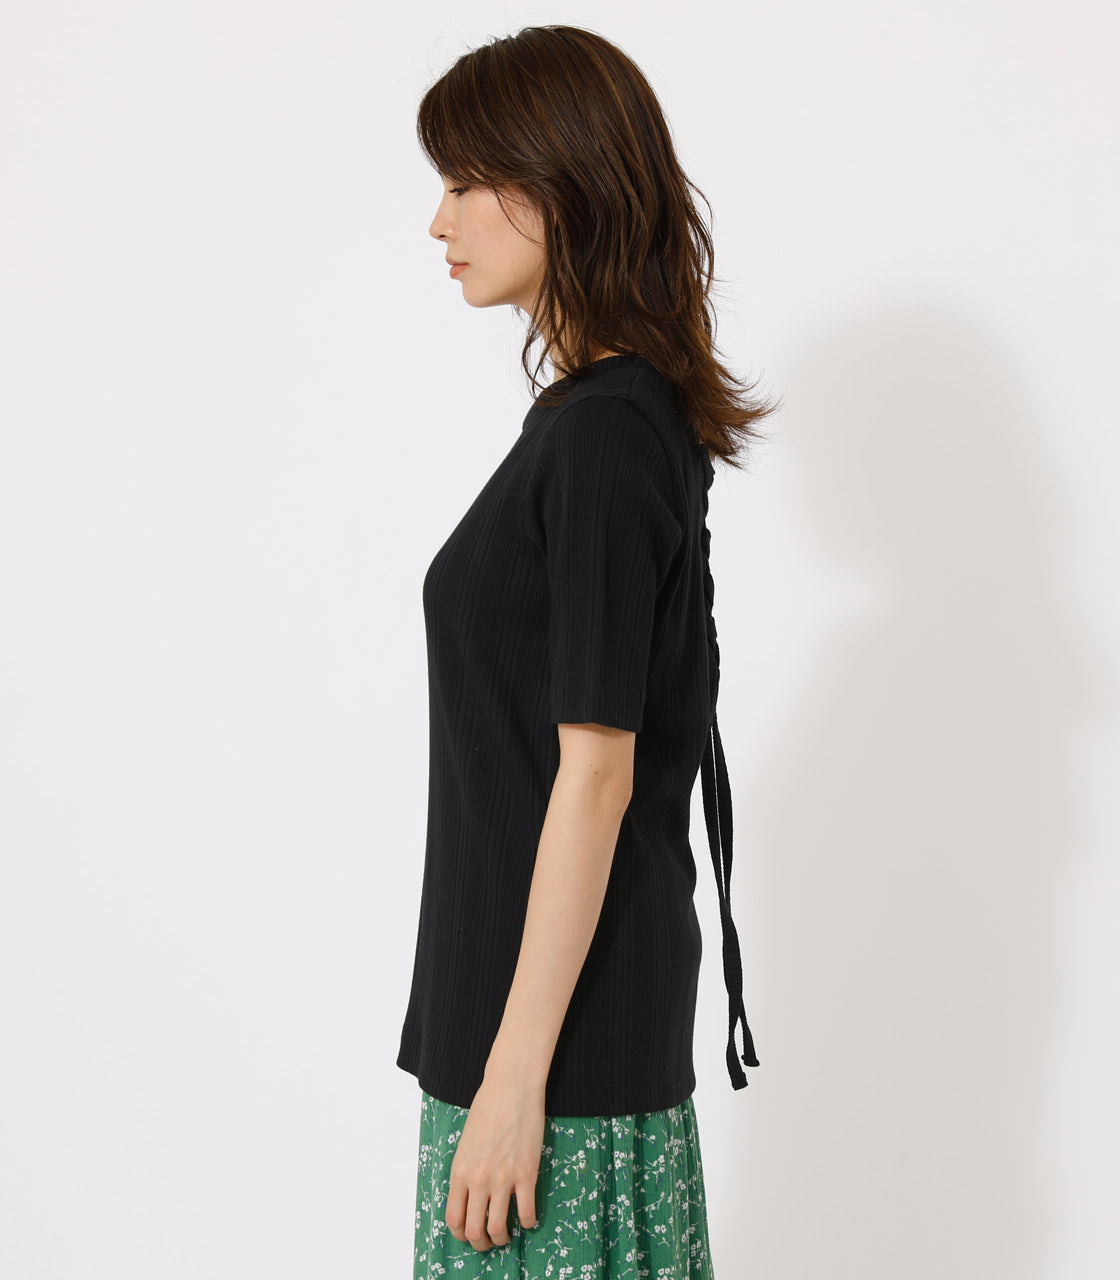 BACK LACE UP TOPS/バックレースアップトップス 詳細画像 BLK 5